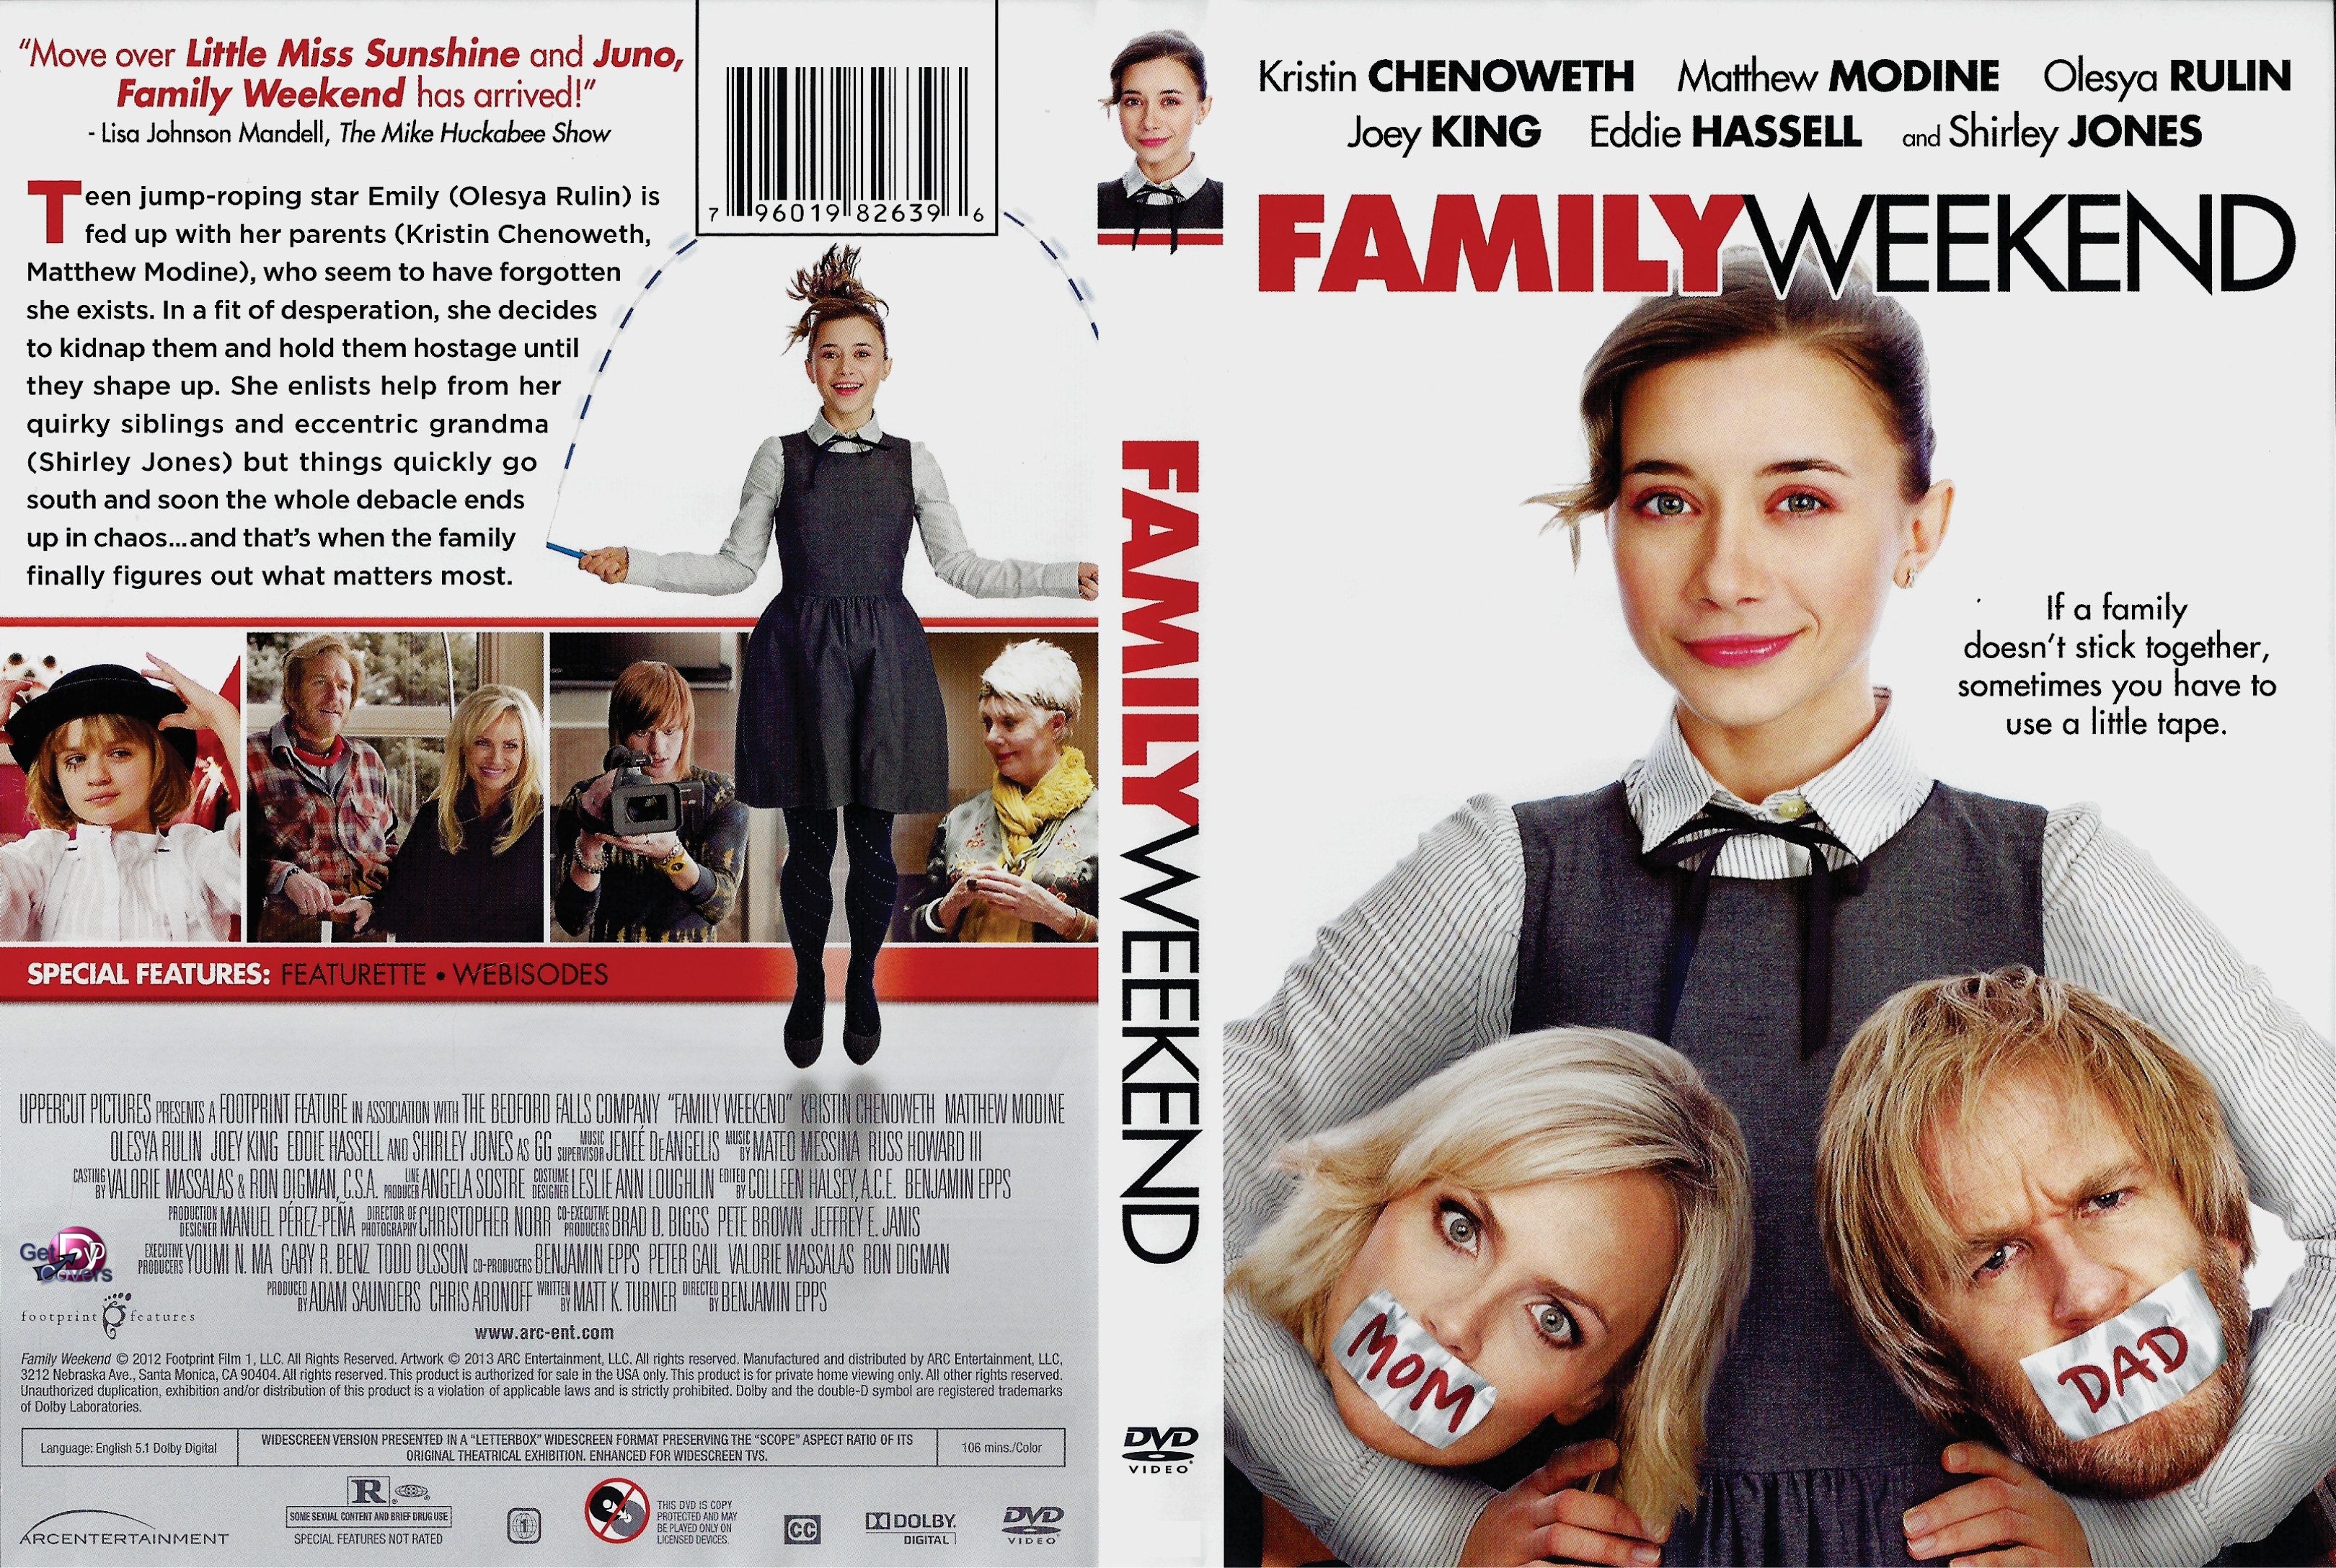 Jaquette DVD Family Weekend Zone 1